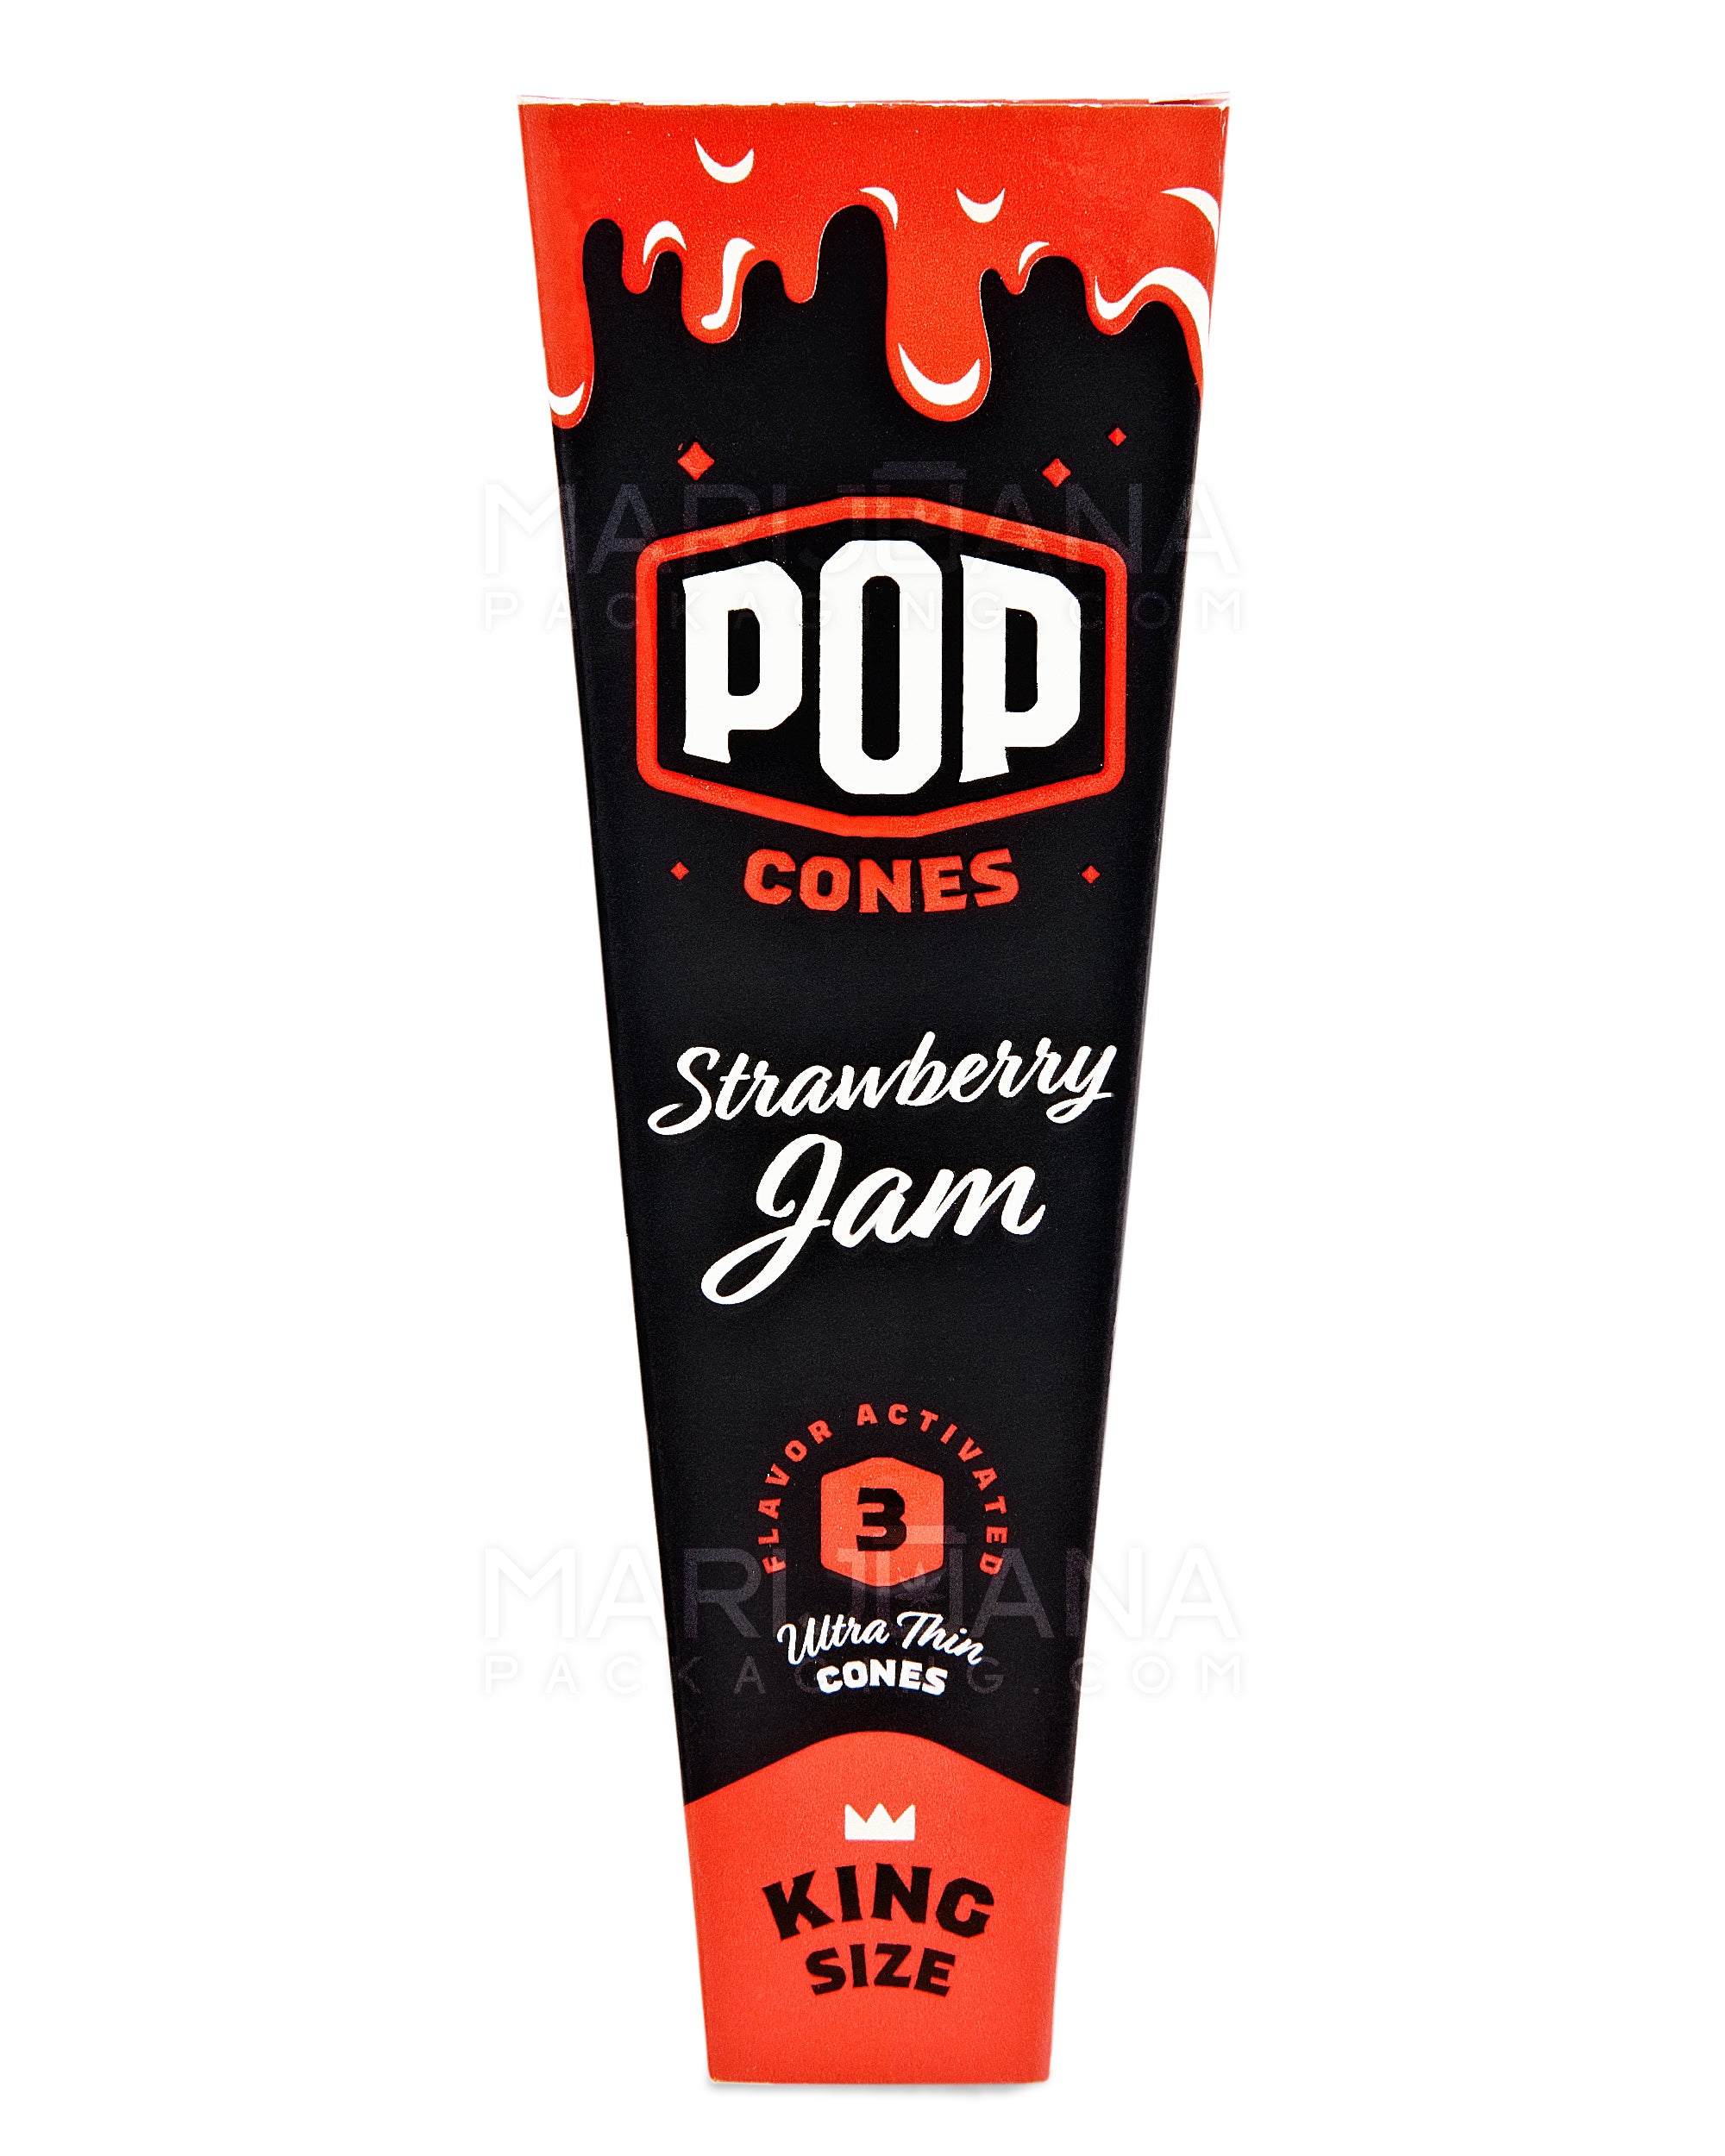 POP CONES | 'Retail Display' King Size Pre-Rolled Cones | 109mm - Strawberry Jam - 24 Count - 2